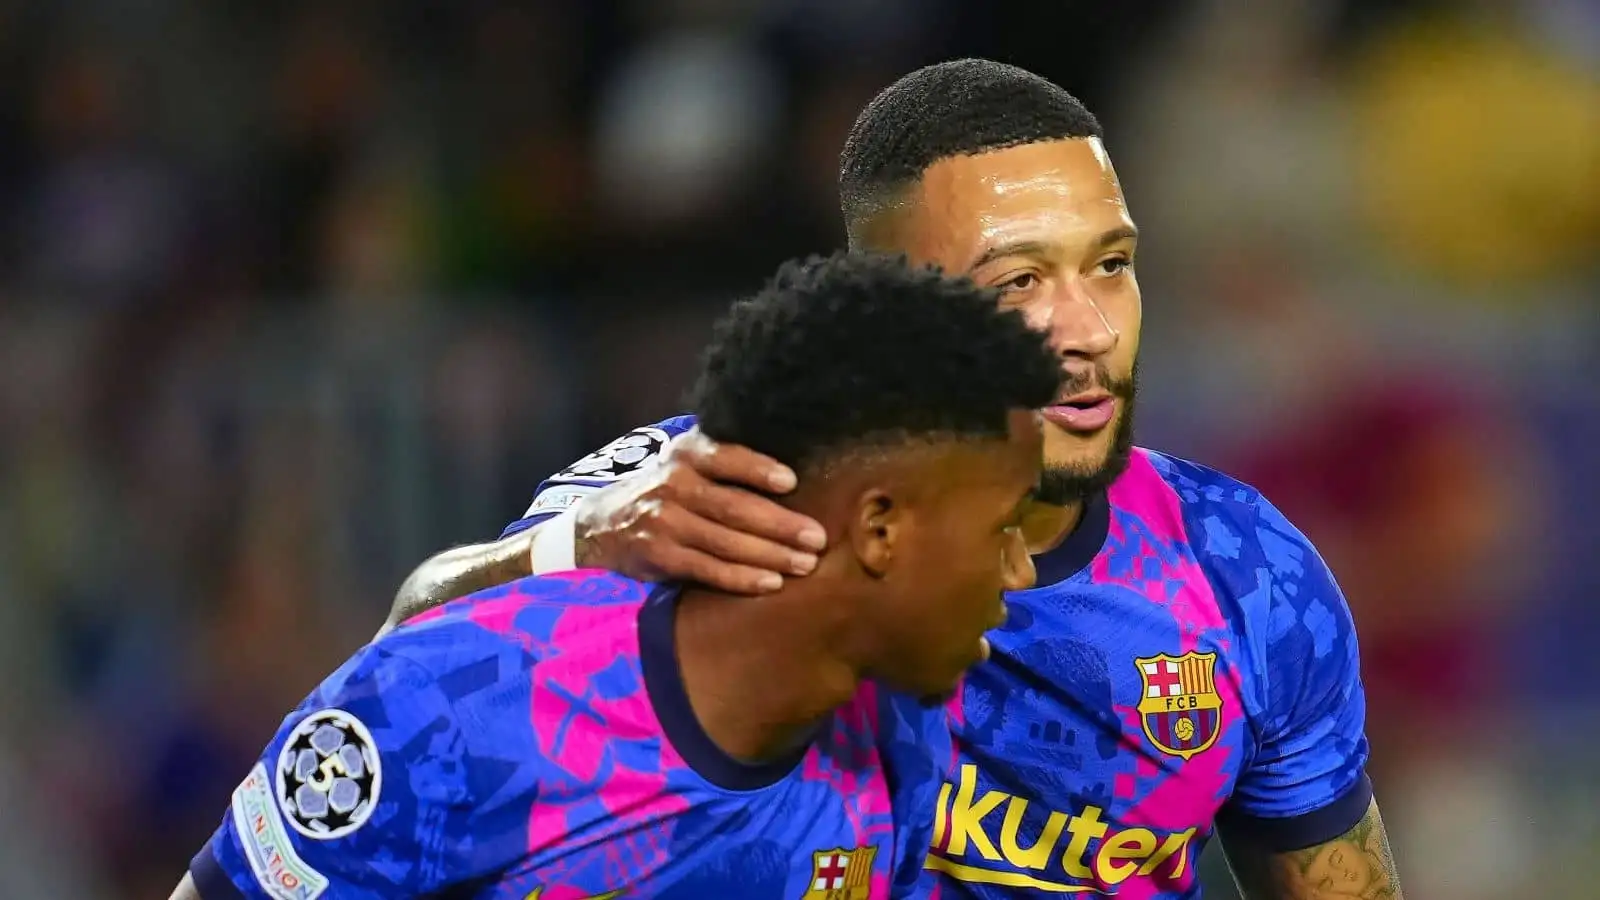 Ansu Fati and Memphis Depay of FC Barcelona during the UEFA Champions League match between FC Barcelona v FC Dynamo Kiev played at Camp Nou Stadium Stadium